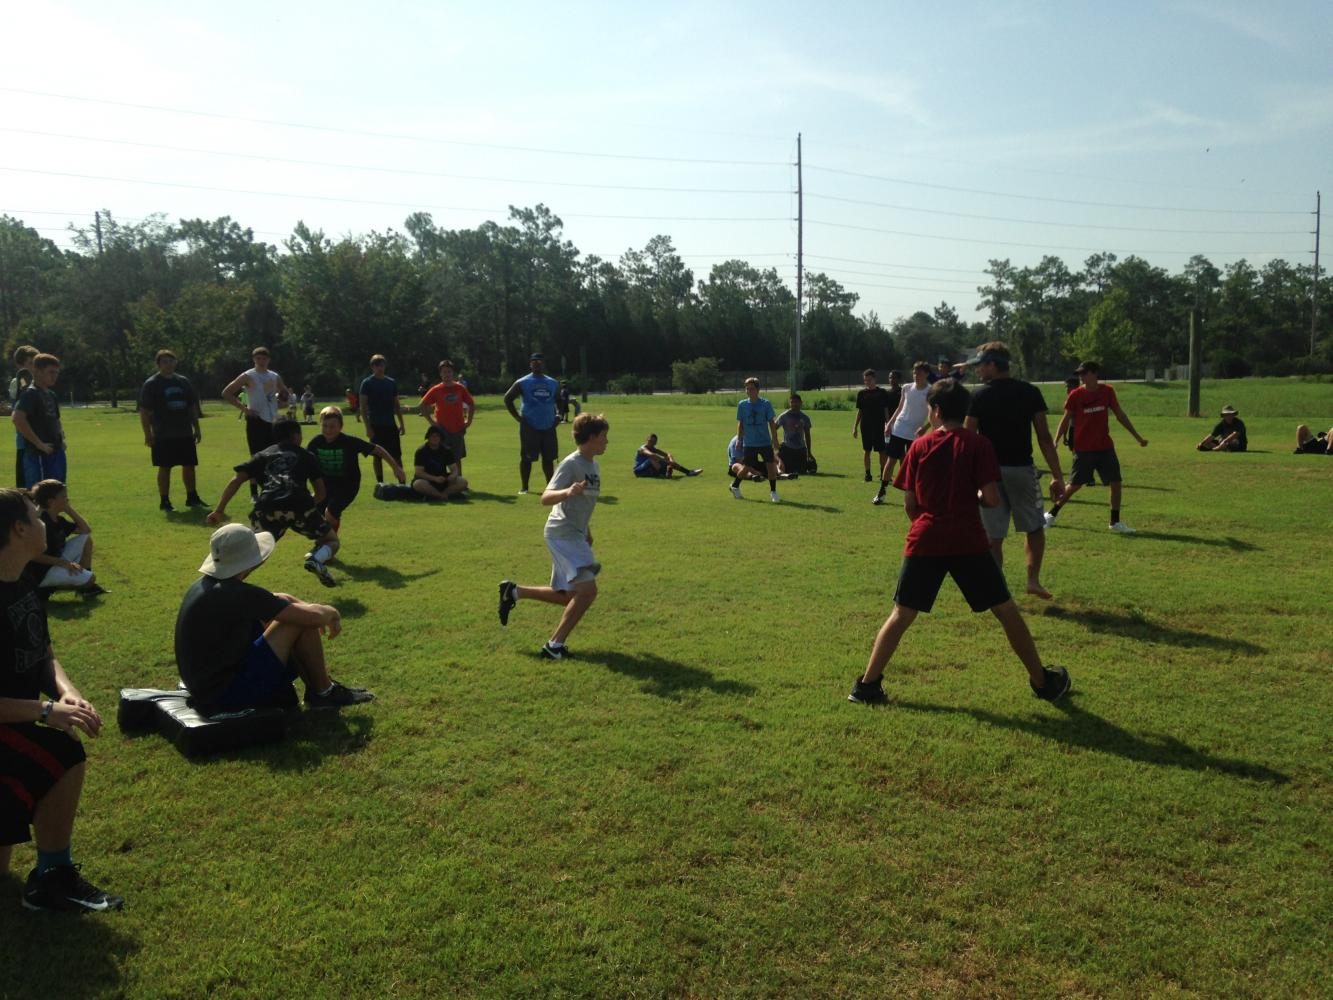 Campers+play+tag+to+practice+tracking+the+ball+carrier.+74+kids+attended+the+camp.